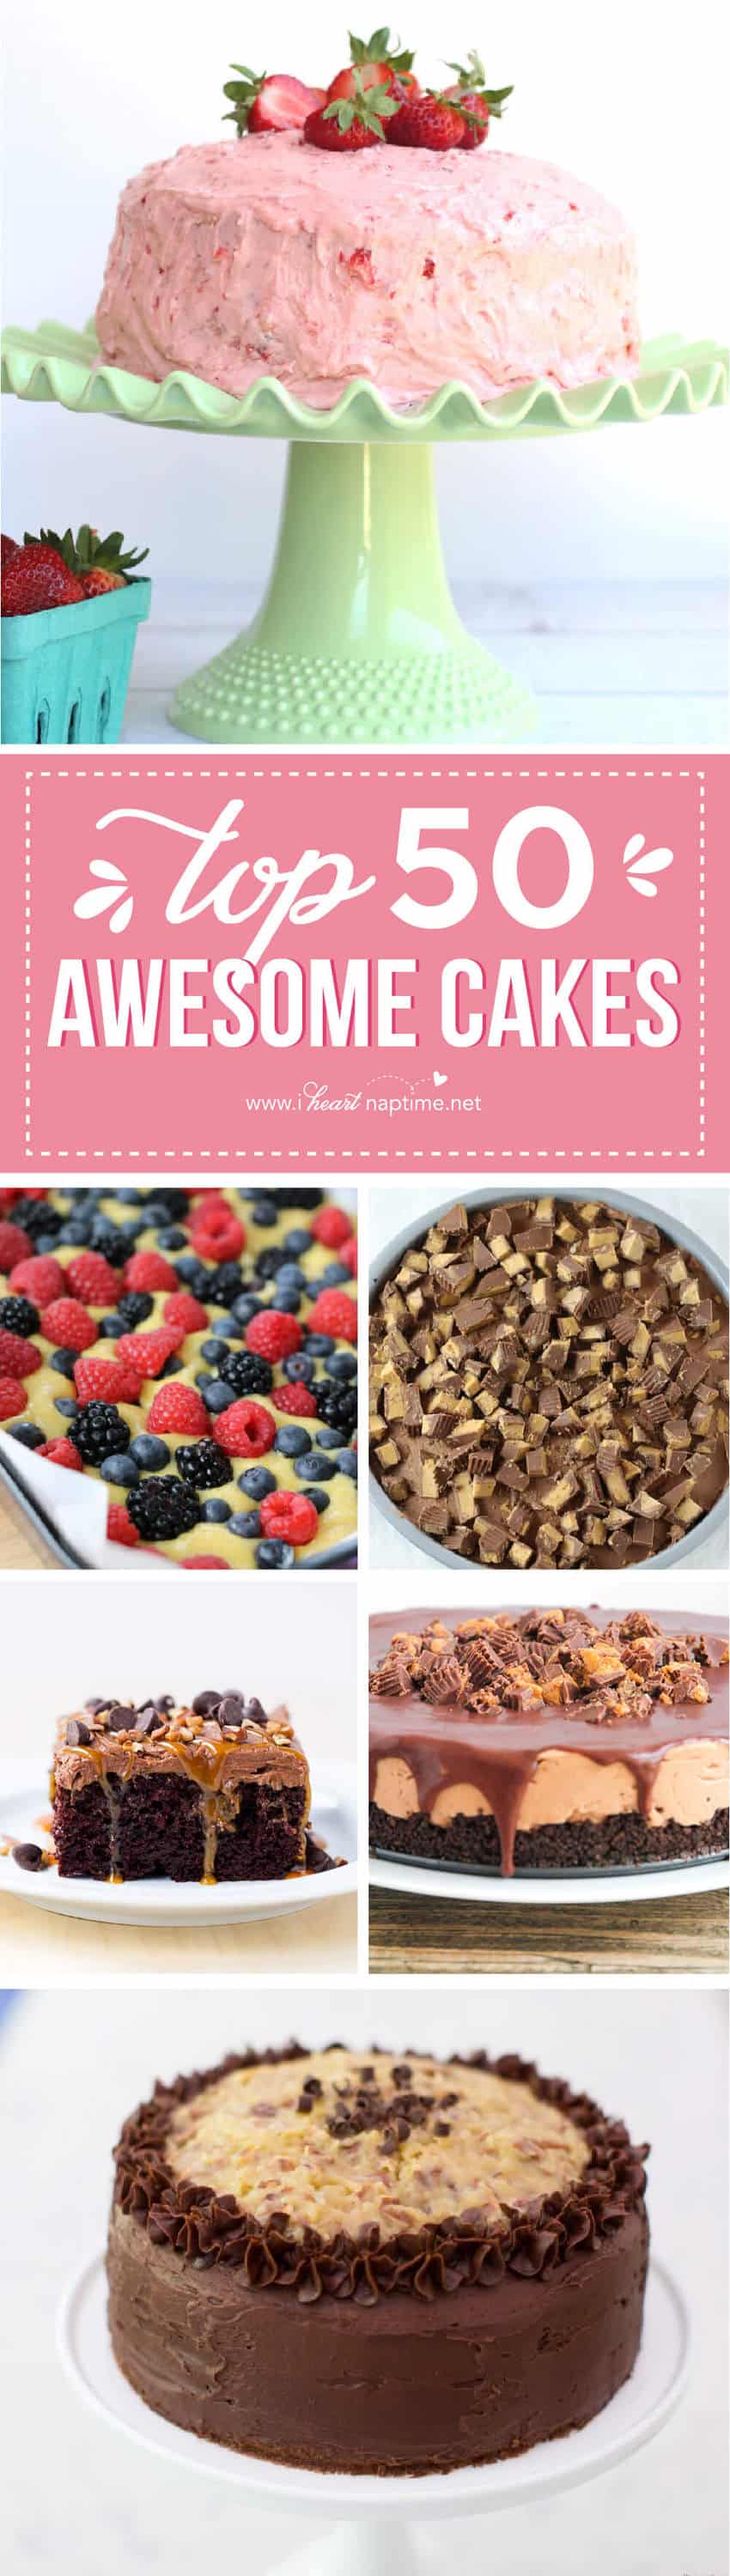 Top 50 Awesome Cakes